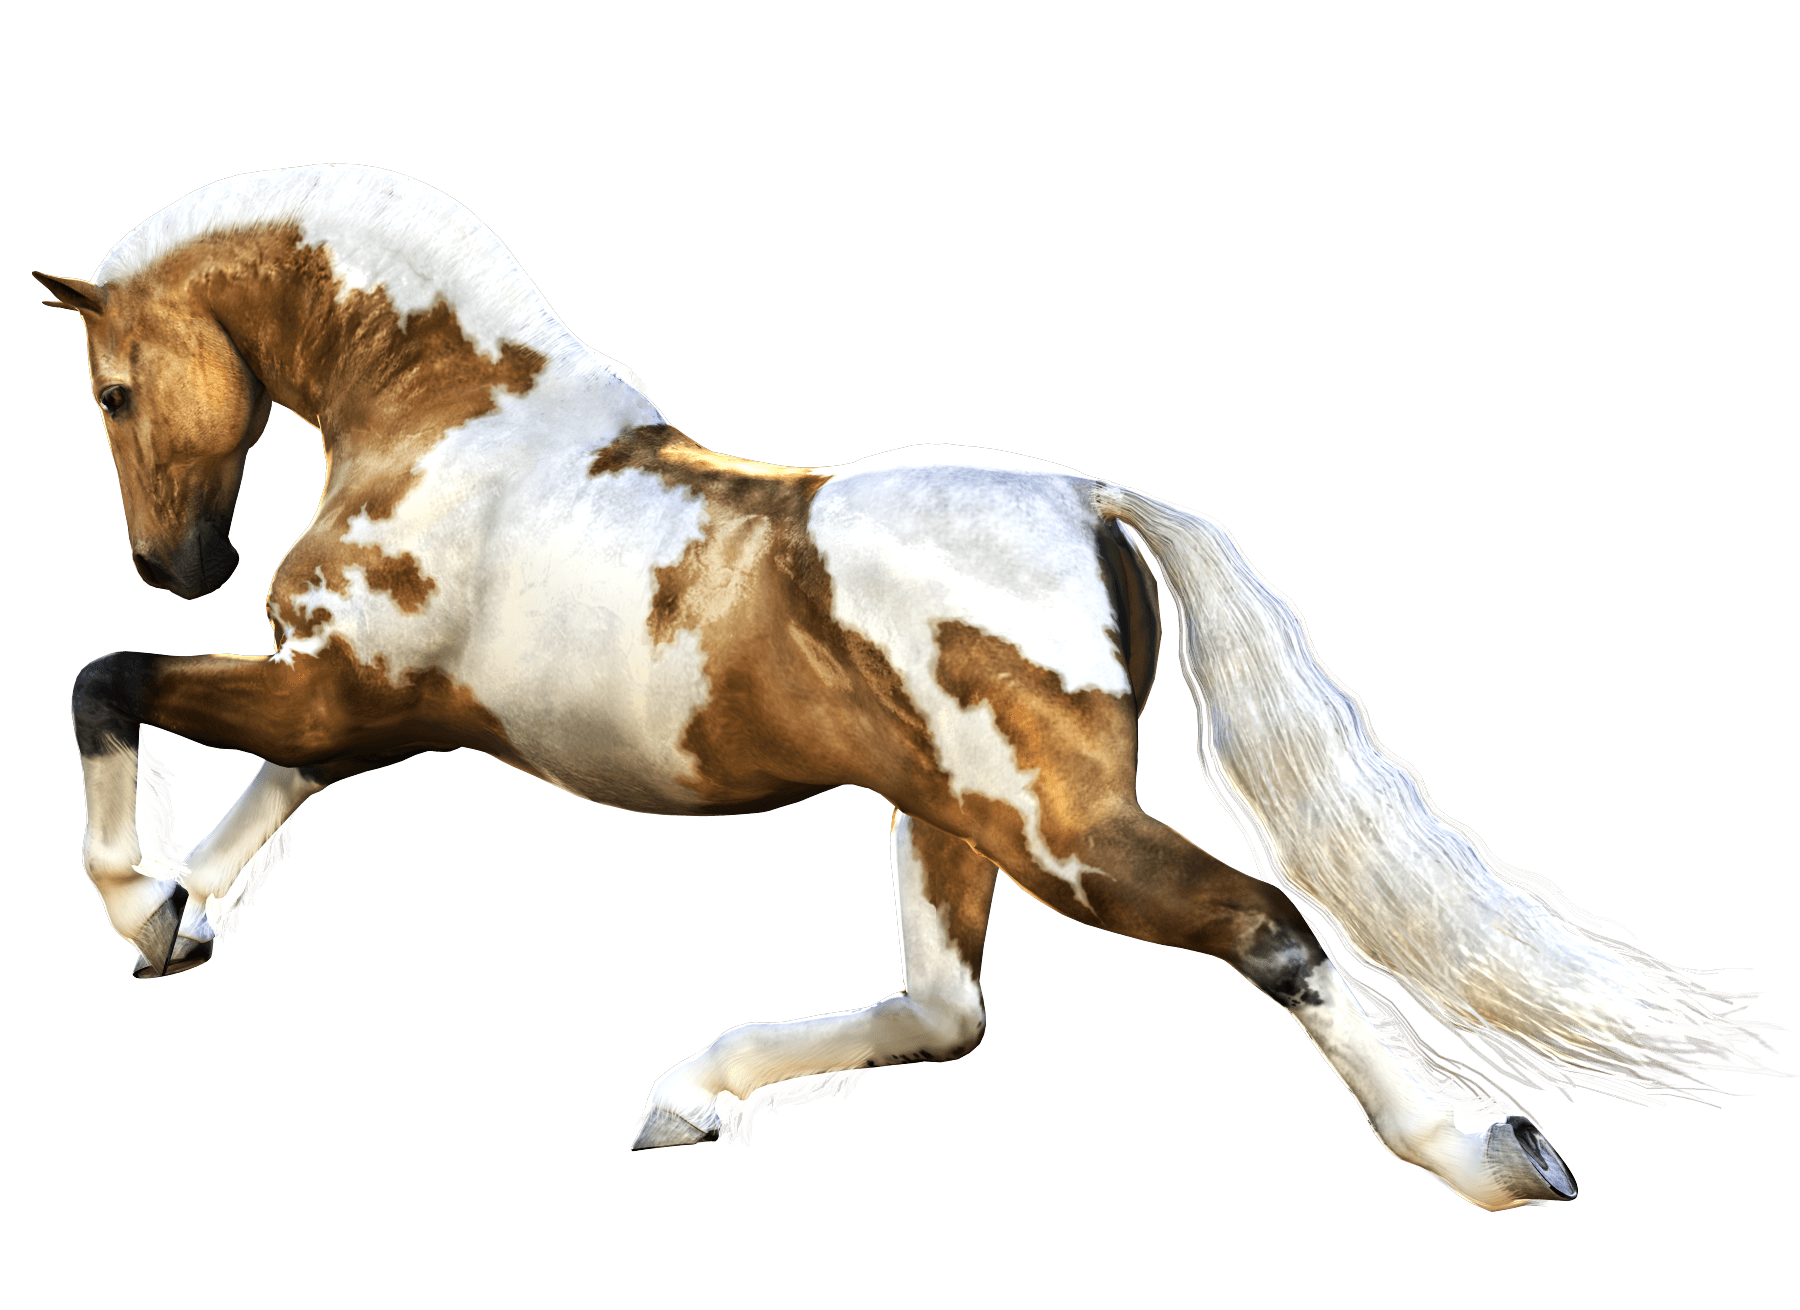 Horse PNGs for Free Download